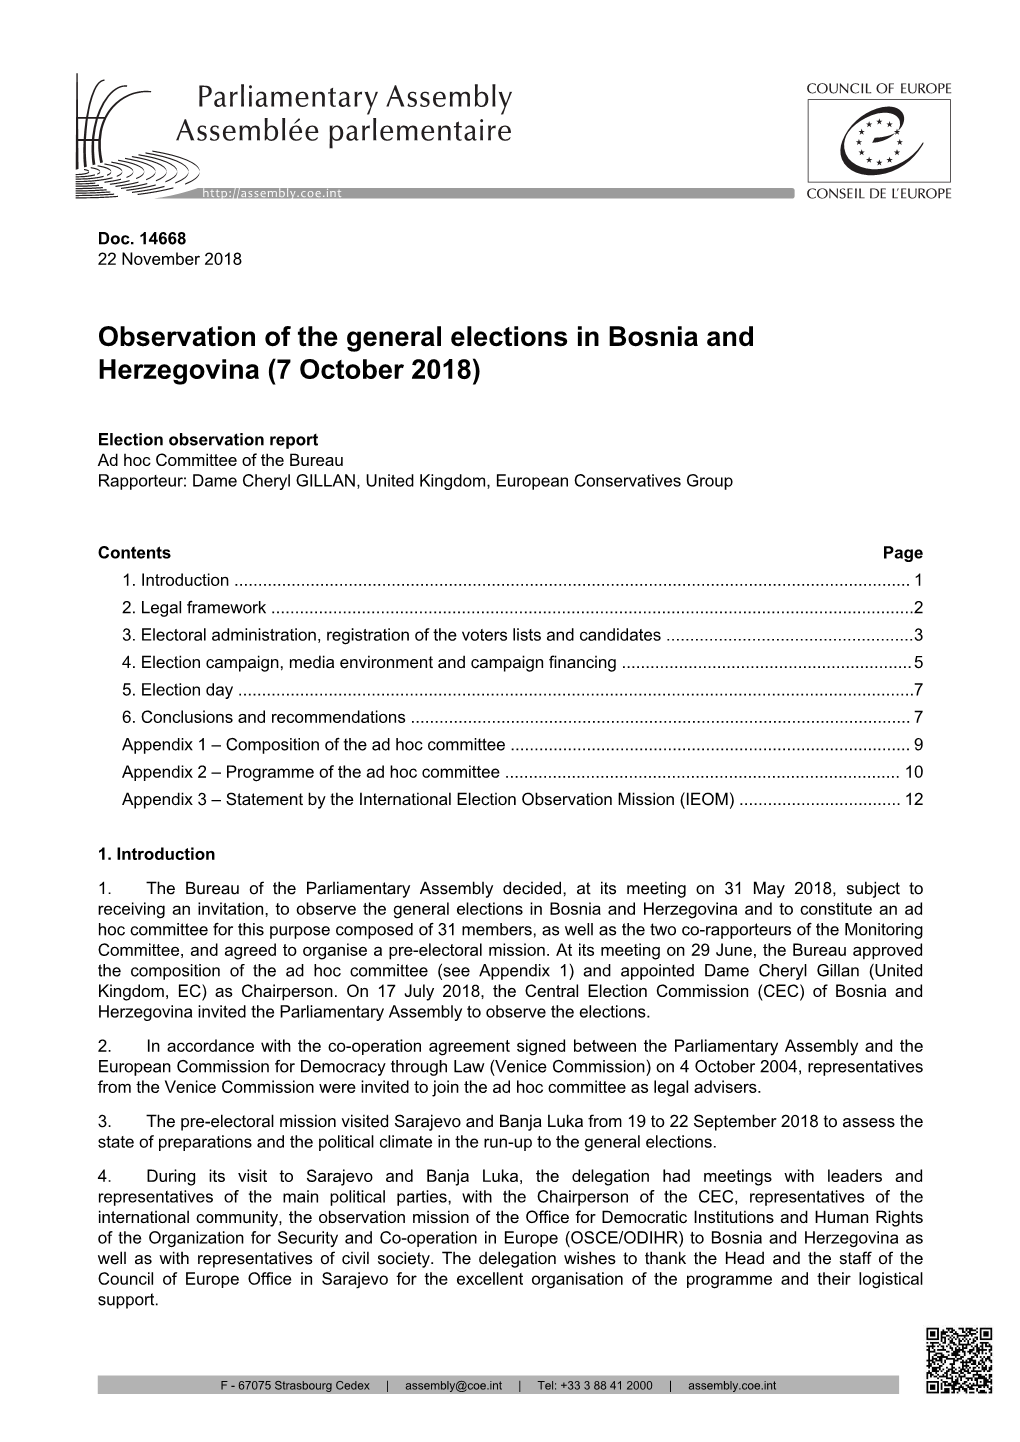 Observation of the General Elections in Bosnia and Herzegovina (7 October 2018)